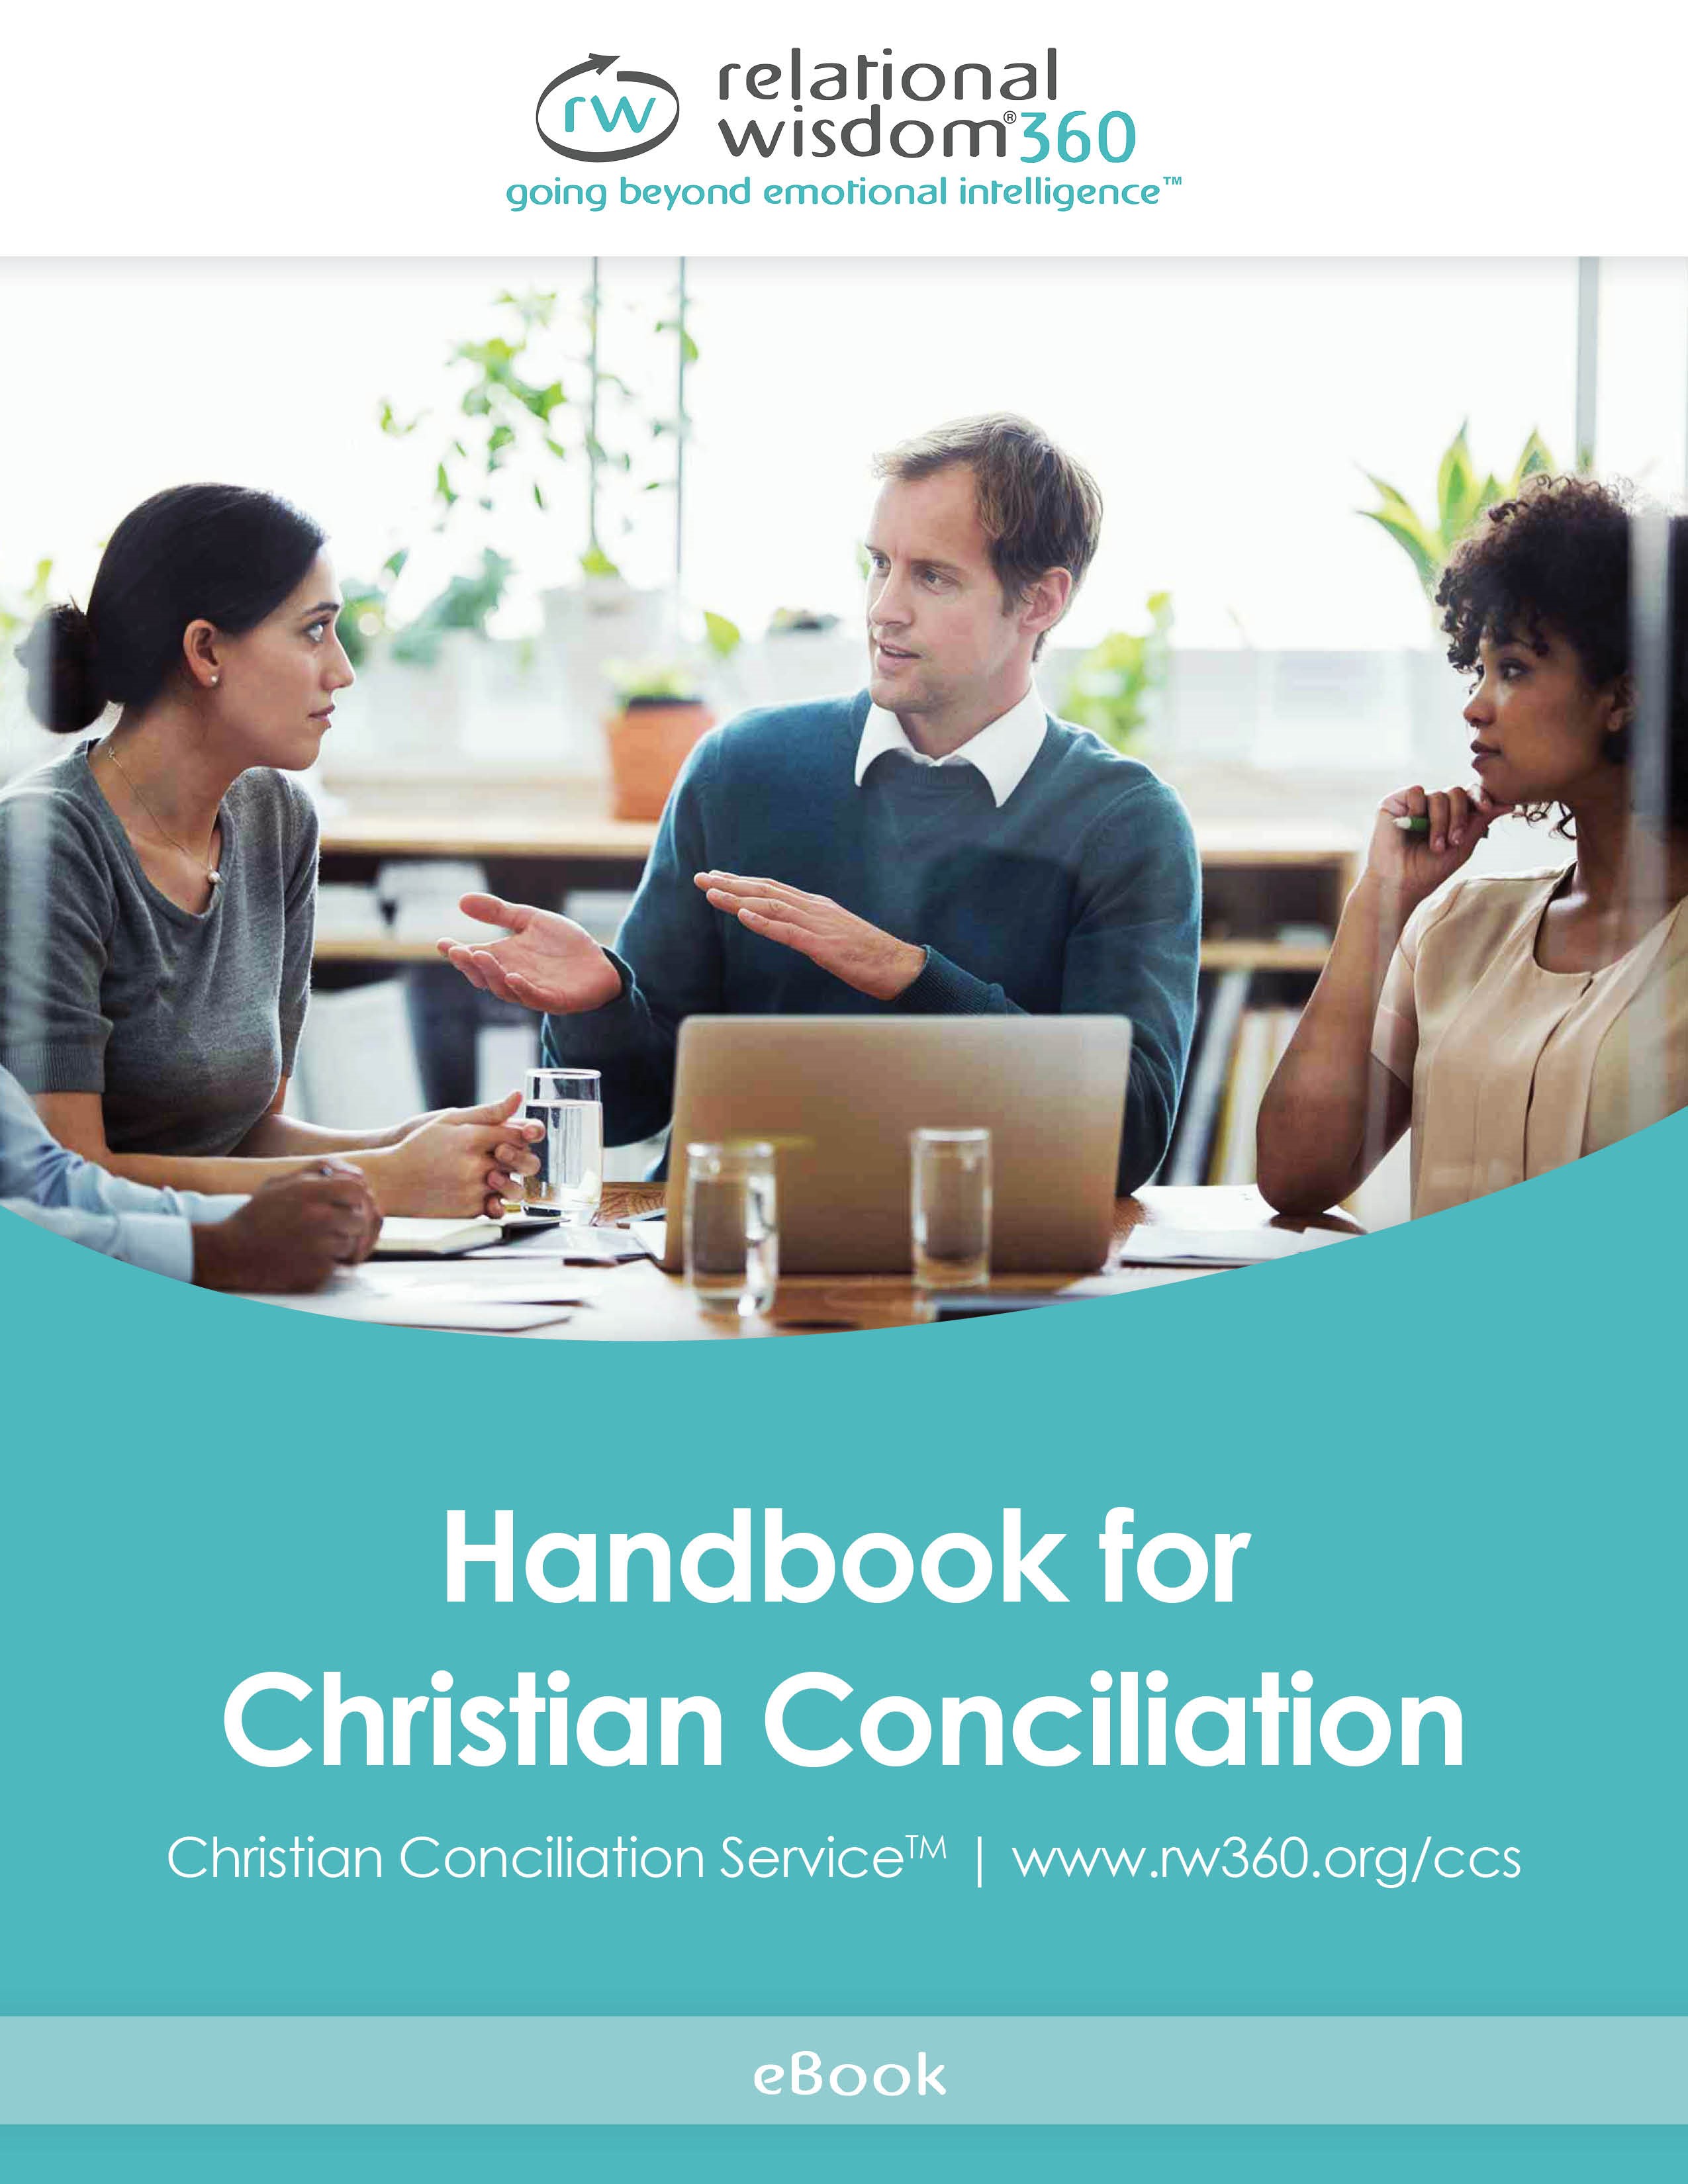 Standard of Conduct for Christian Conciliation